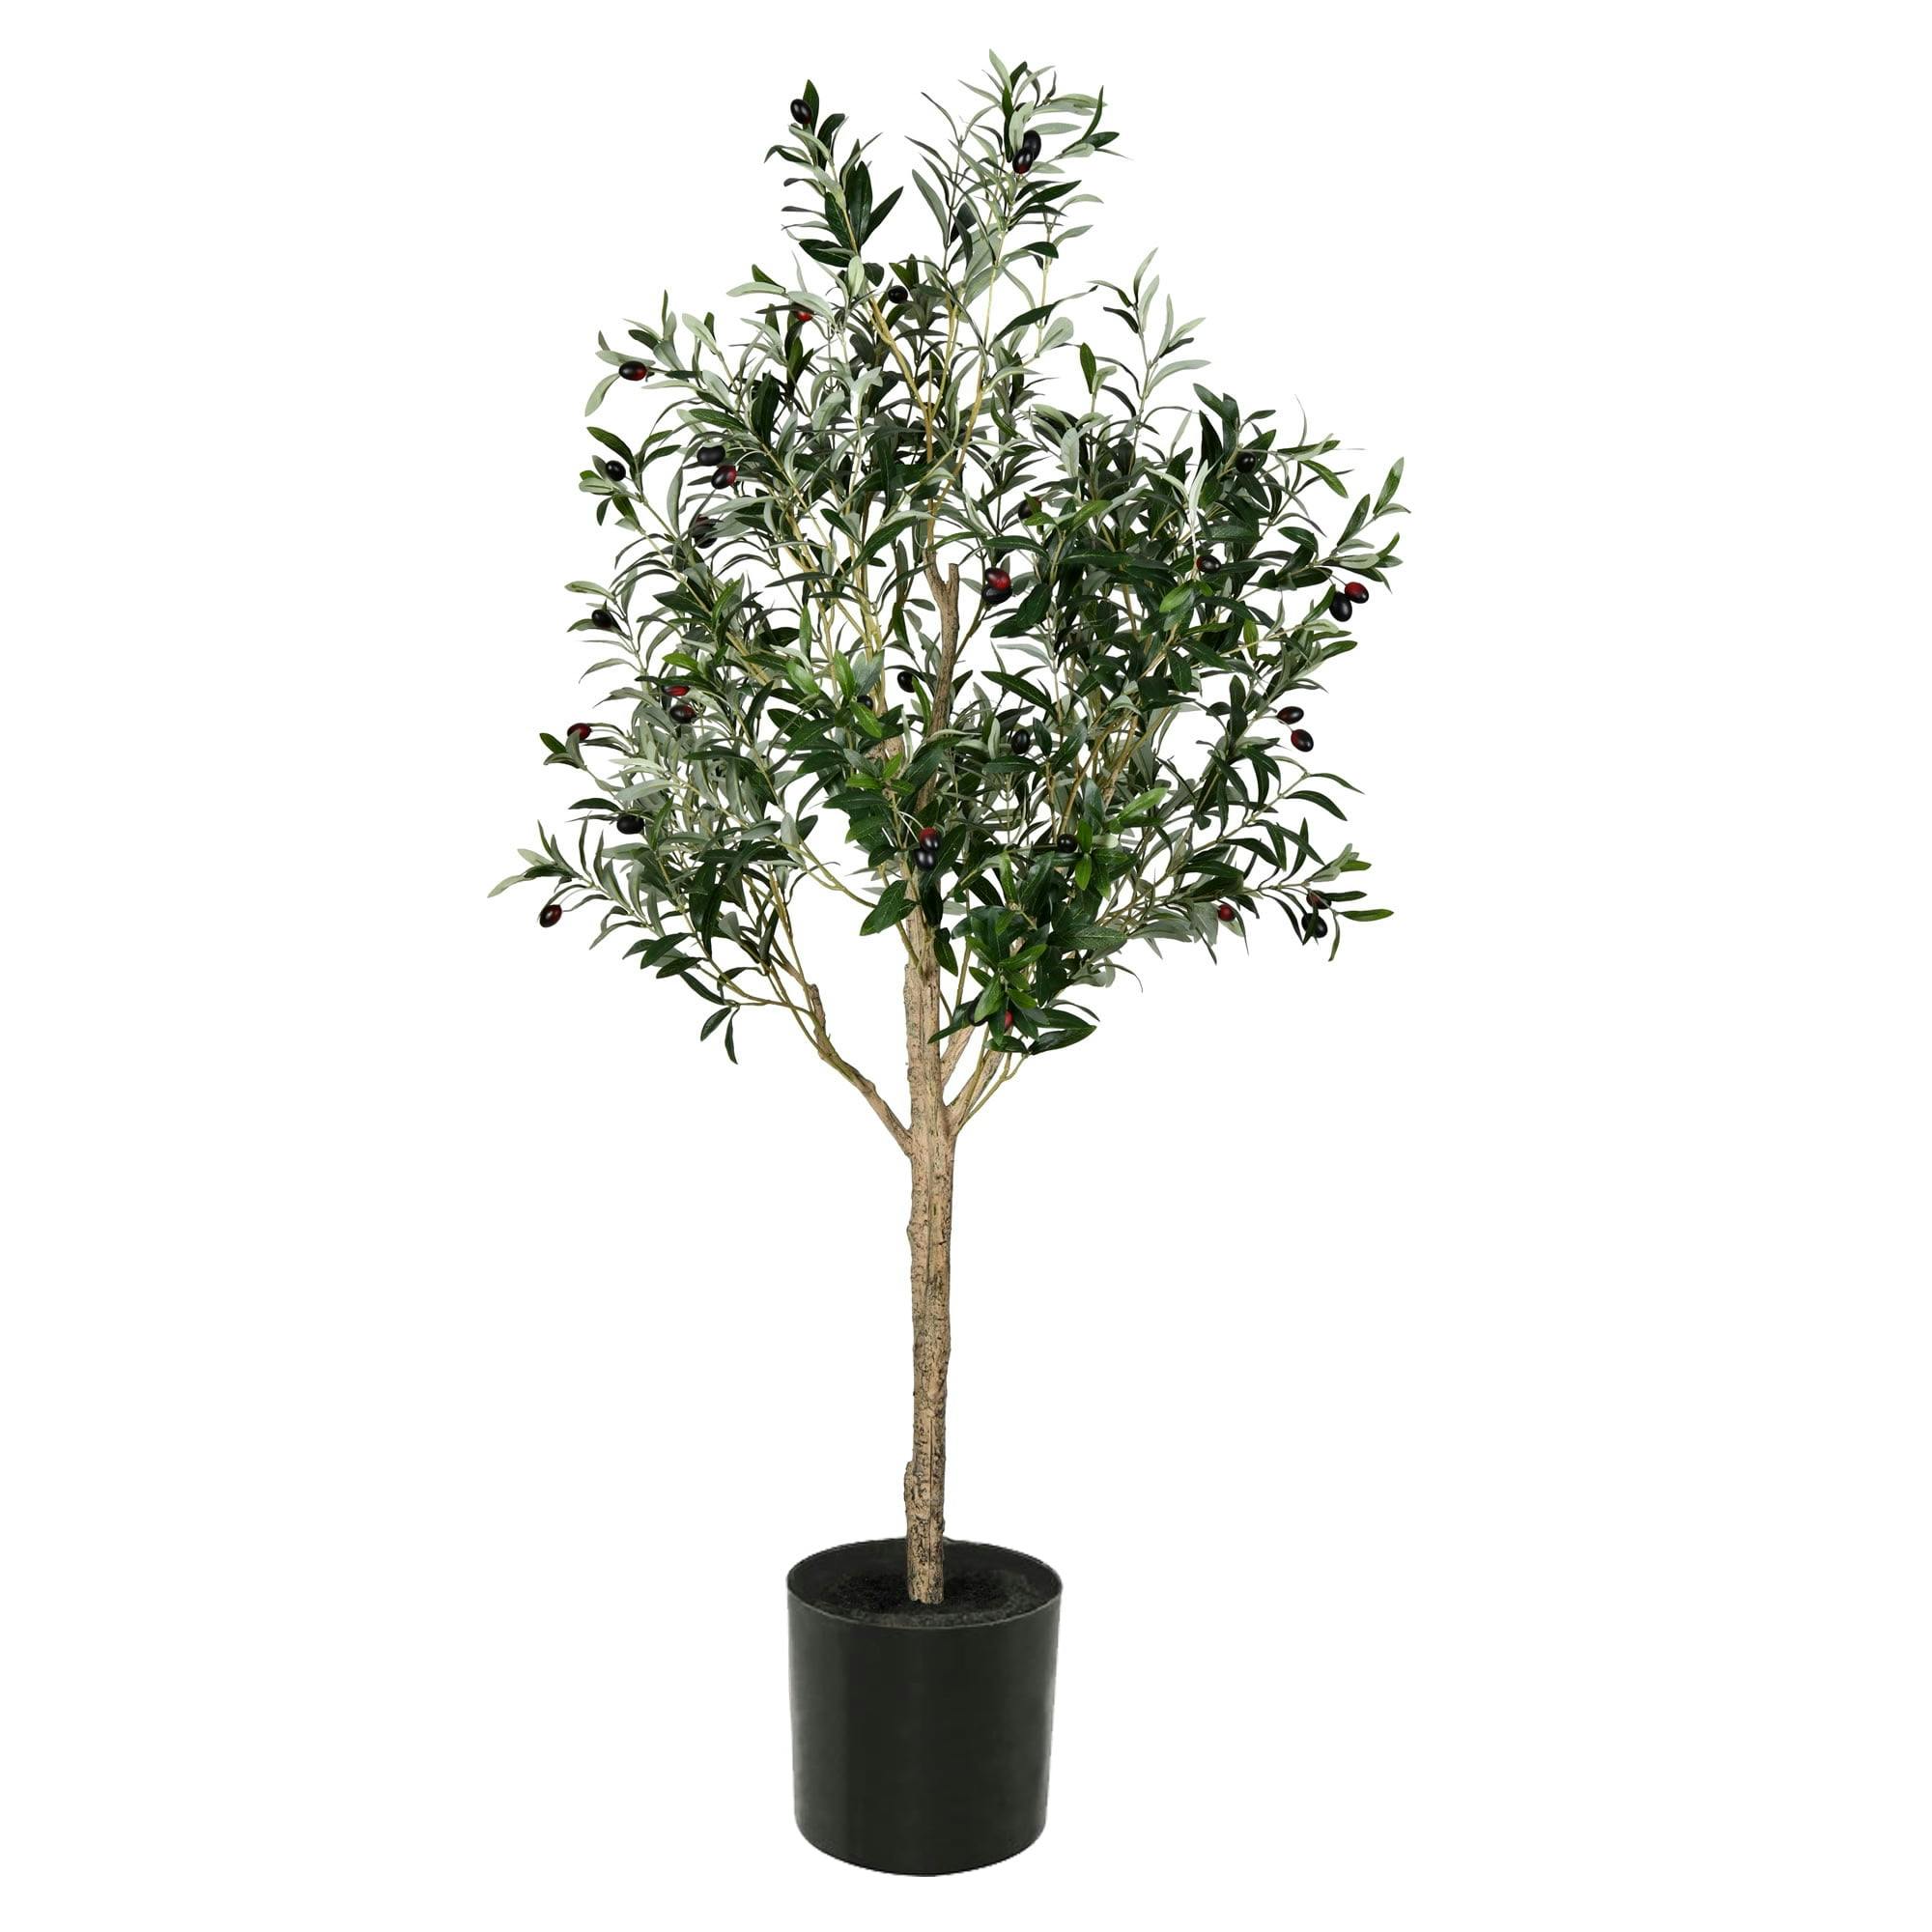 Lush Lifelike Potted Olive Tree with 56 Olives - 63" Height